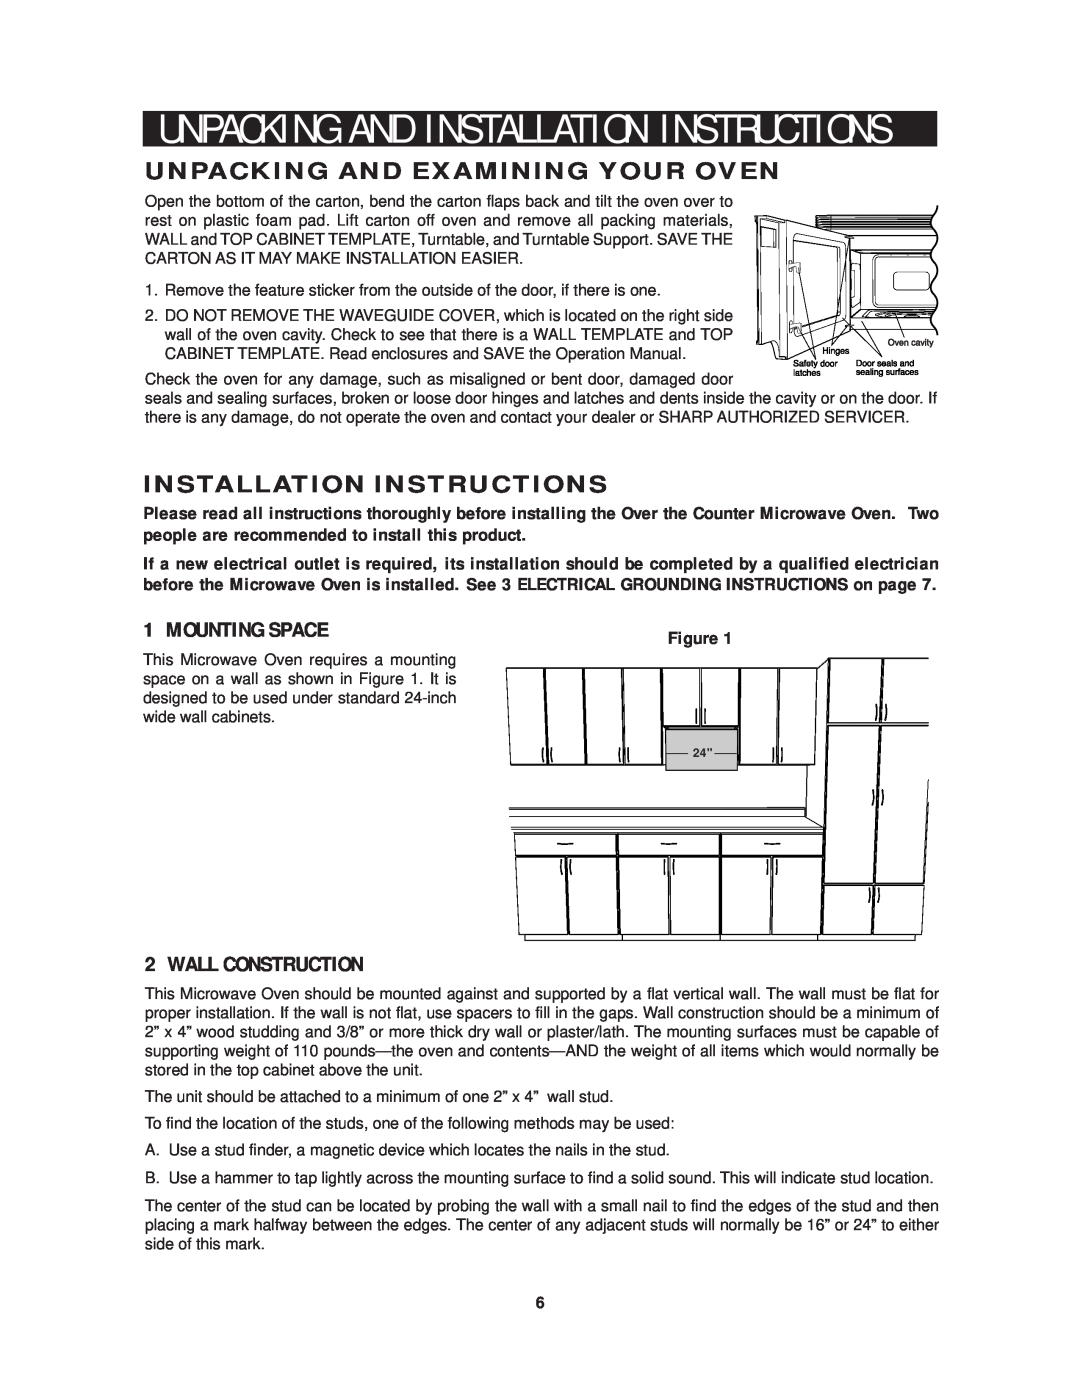 Sharp R-1214 Unpacking And Examining Your Oven, Installation Instructions, Mounting Space, Wall Construction 